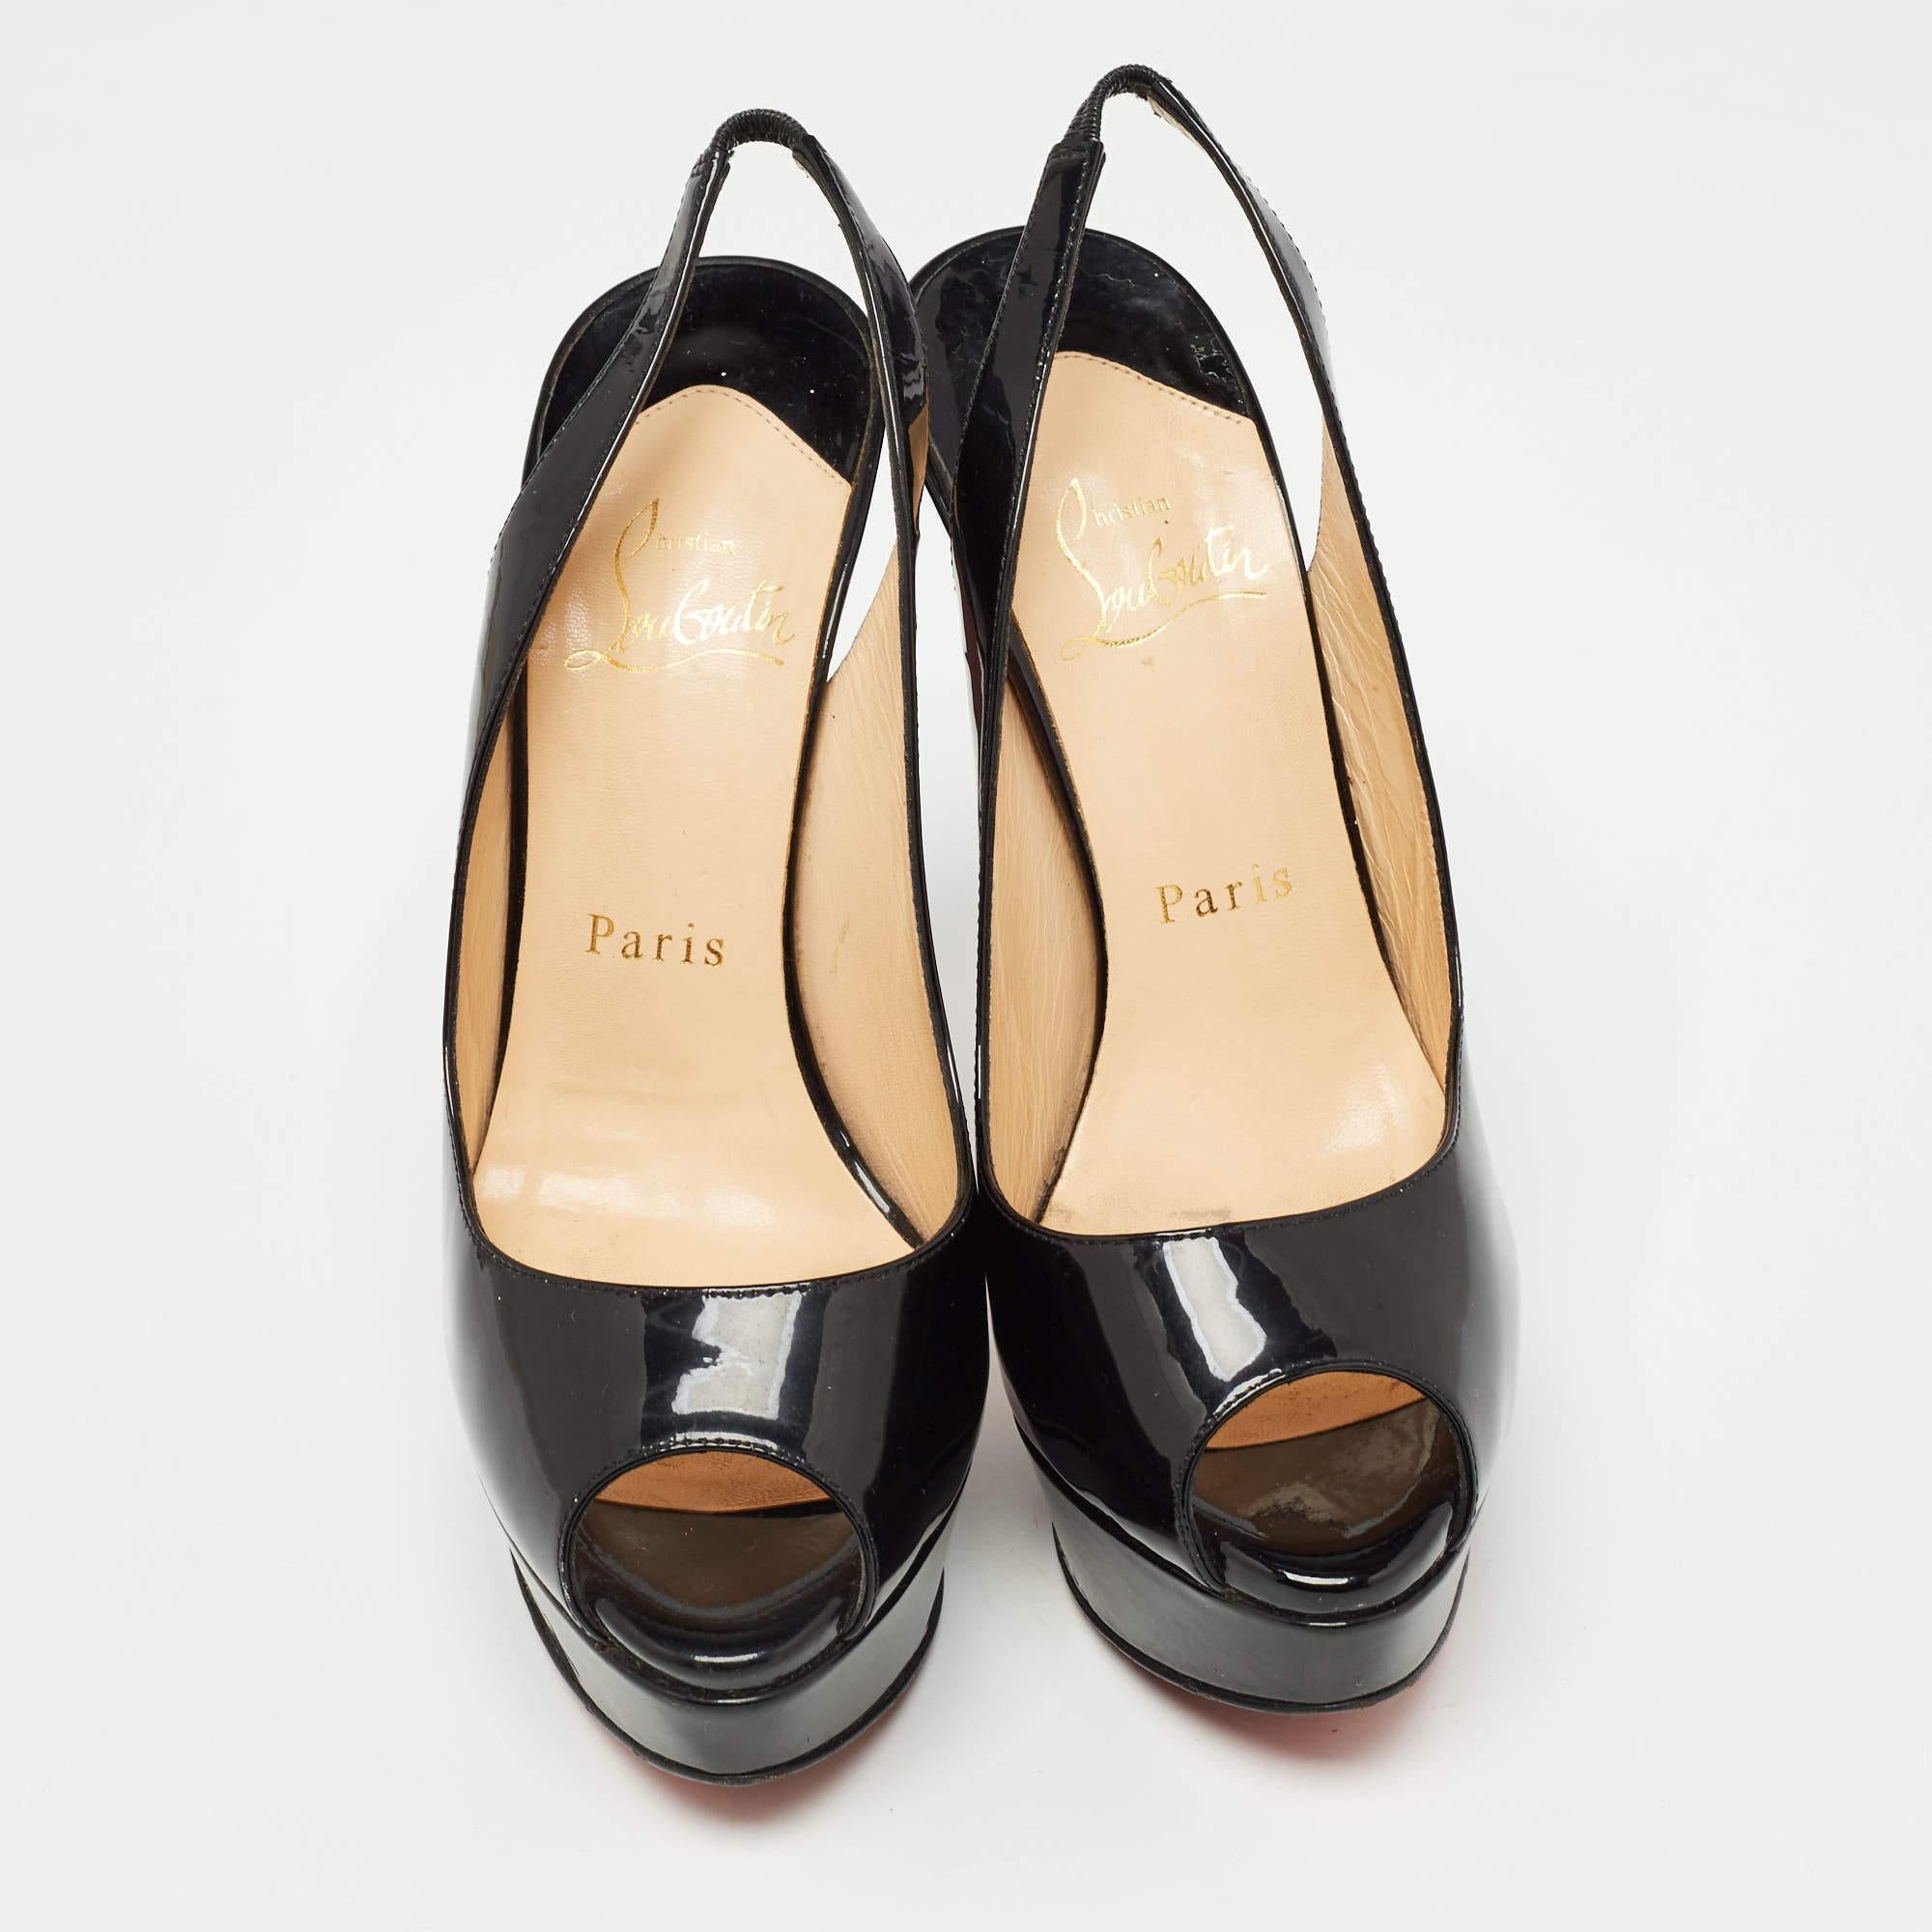 These black pumps from Christian Louboutin are meant to be a loved choice. Wonderfully crafted and balanced on sleek heels, the pumps will lift your feet in a stunning silhouette.

Includes: Original Box, Extra Heel Tips

